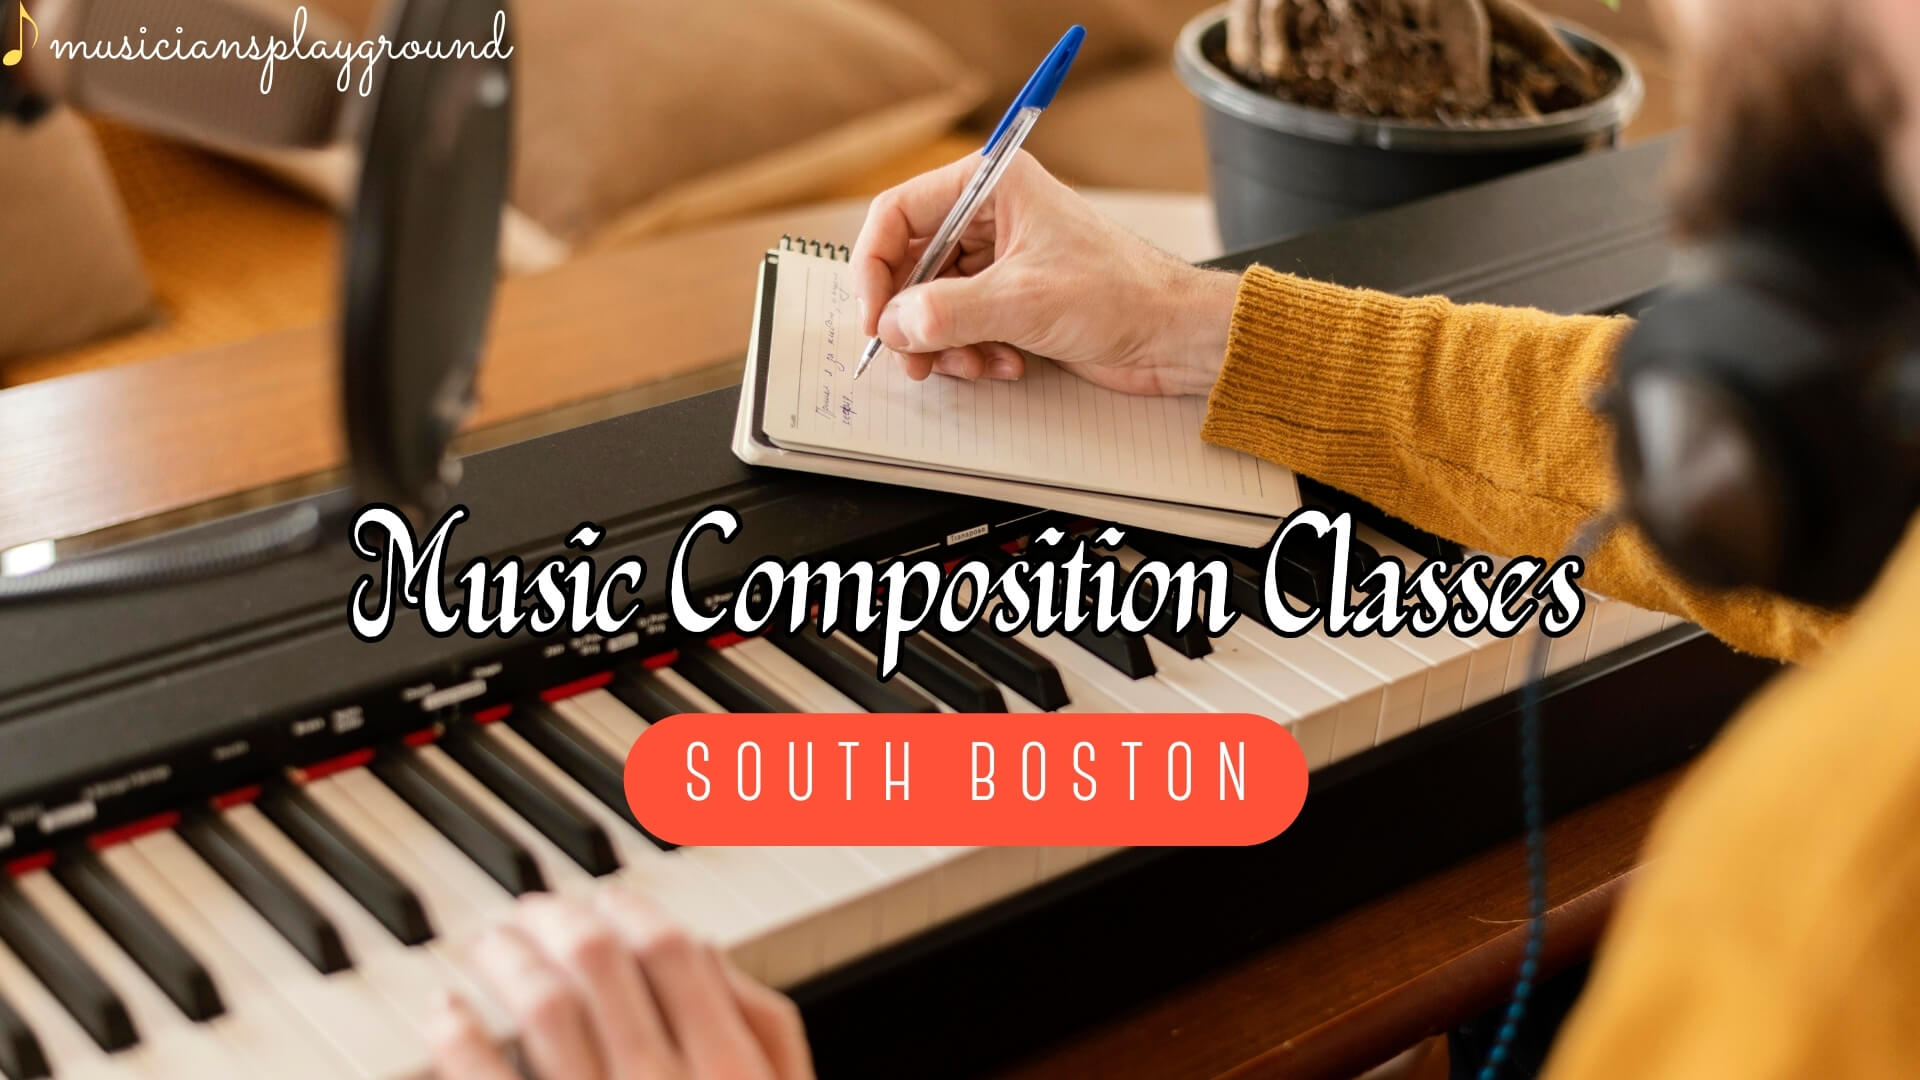 Welcome to South Boston: The Hub of Music Composition Classes